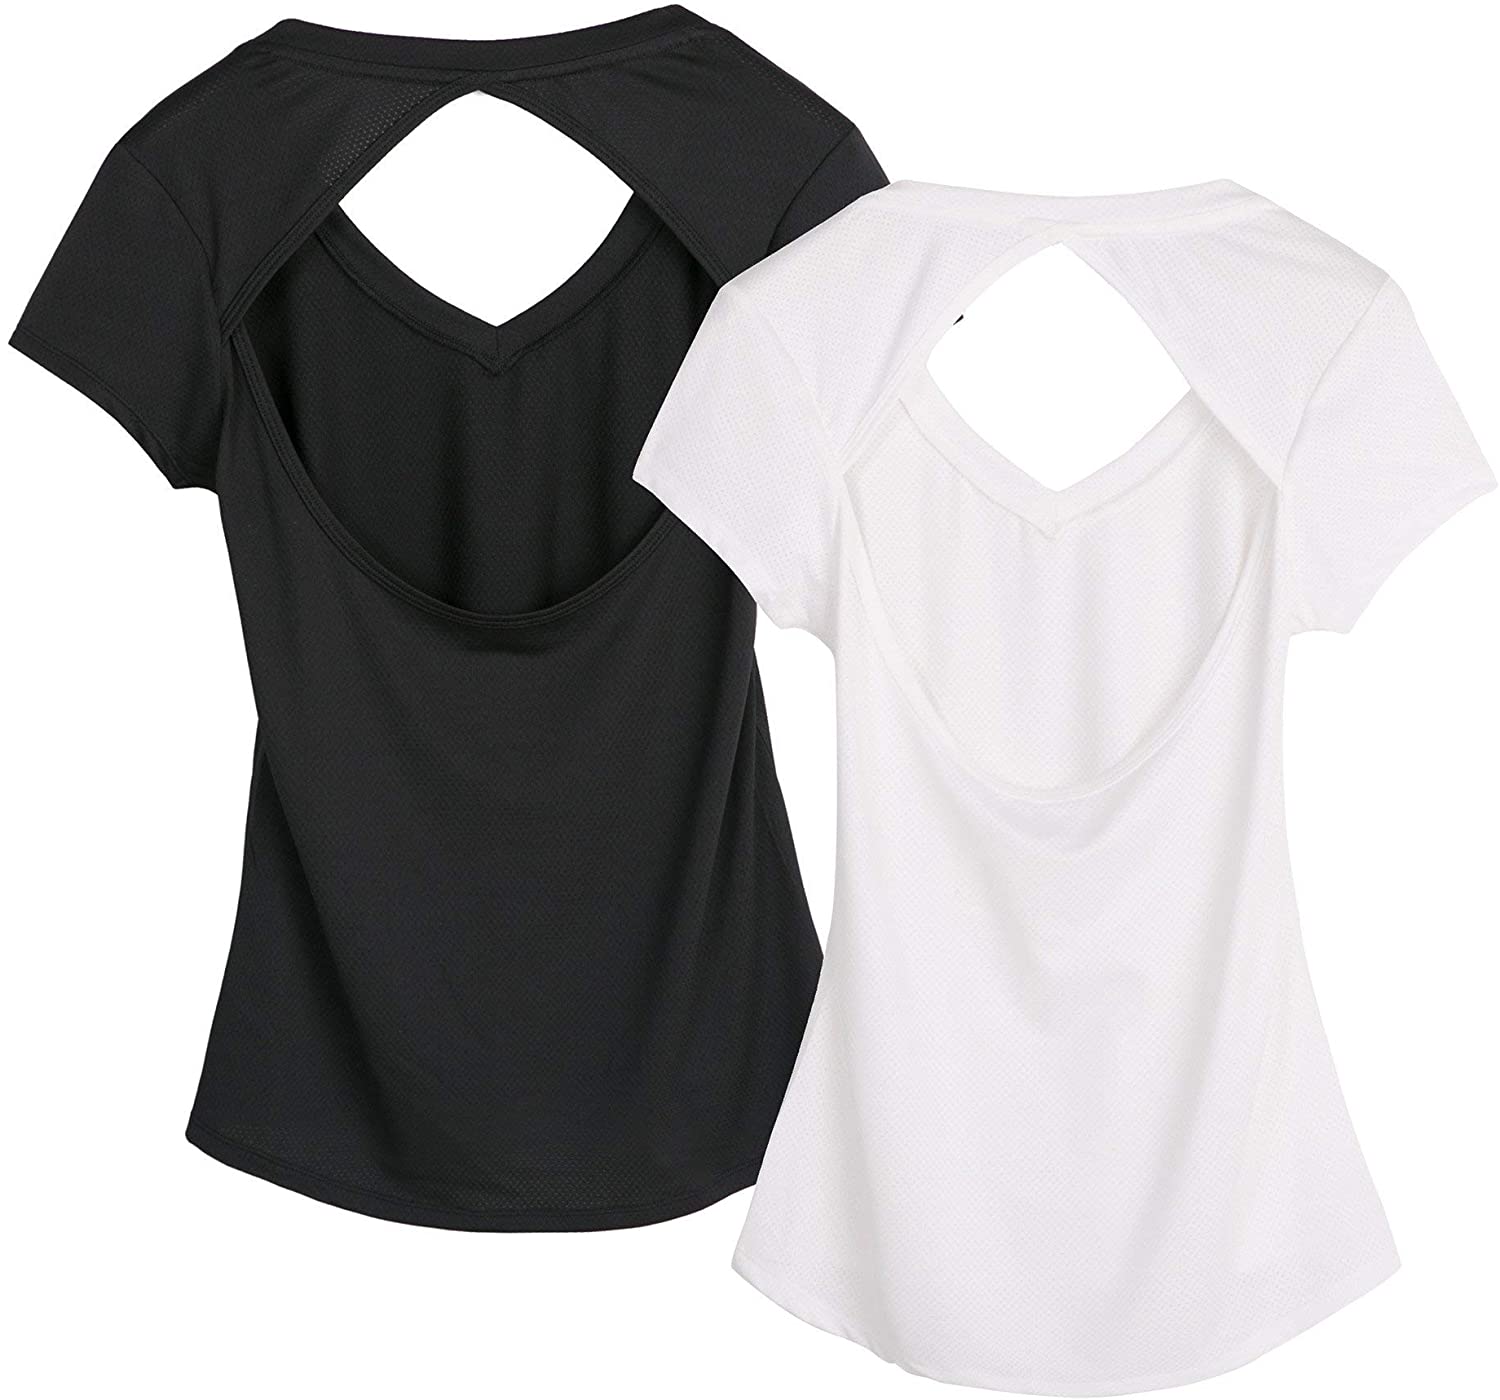 icyzone Women's 2-Pack Workout Shirts V-Neck Yoga Gym Tops Lightweight Casual T-Shirt 